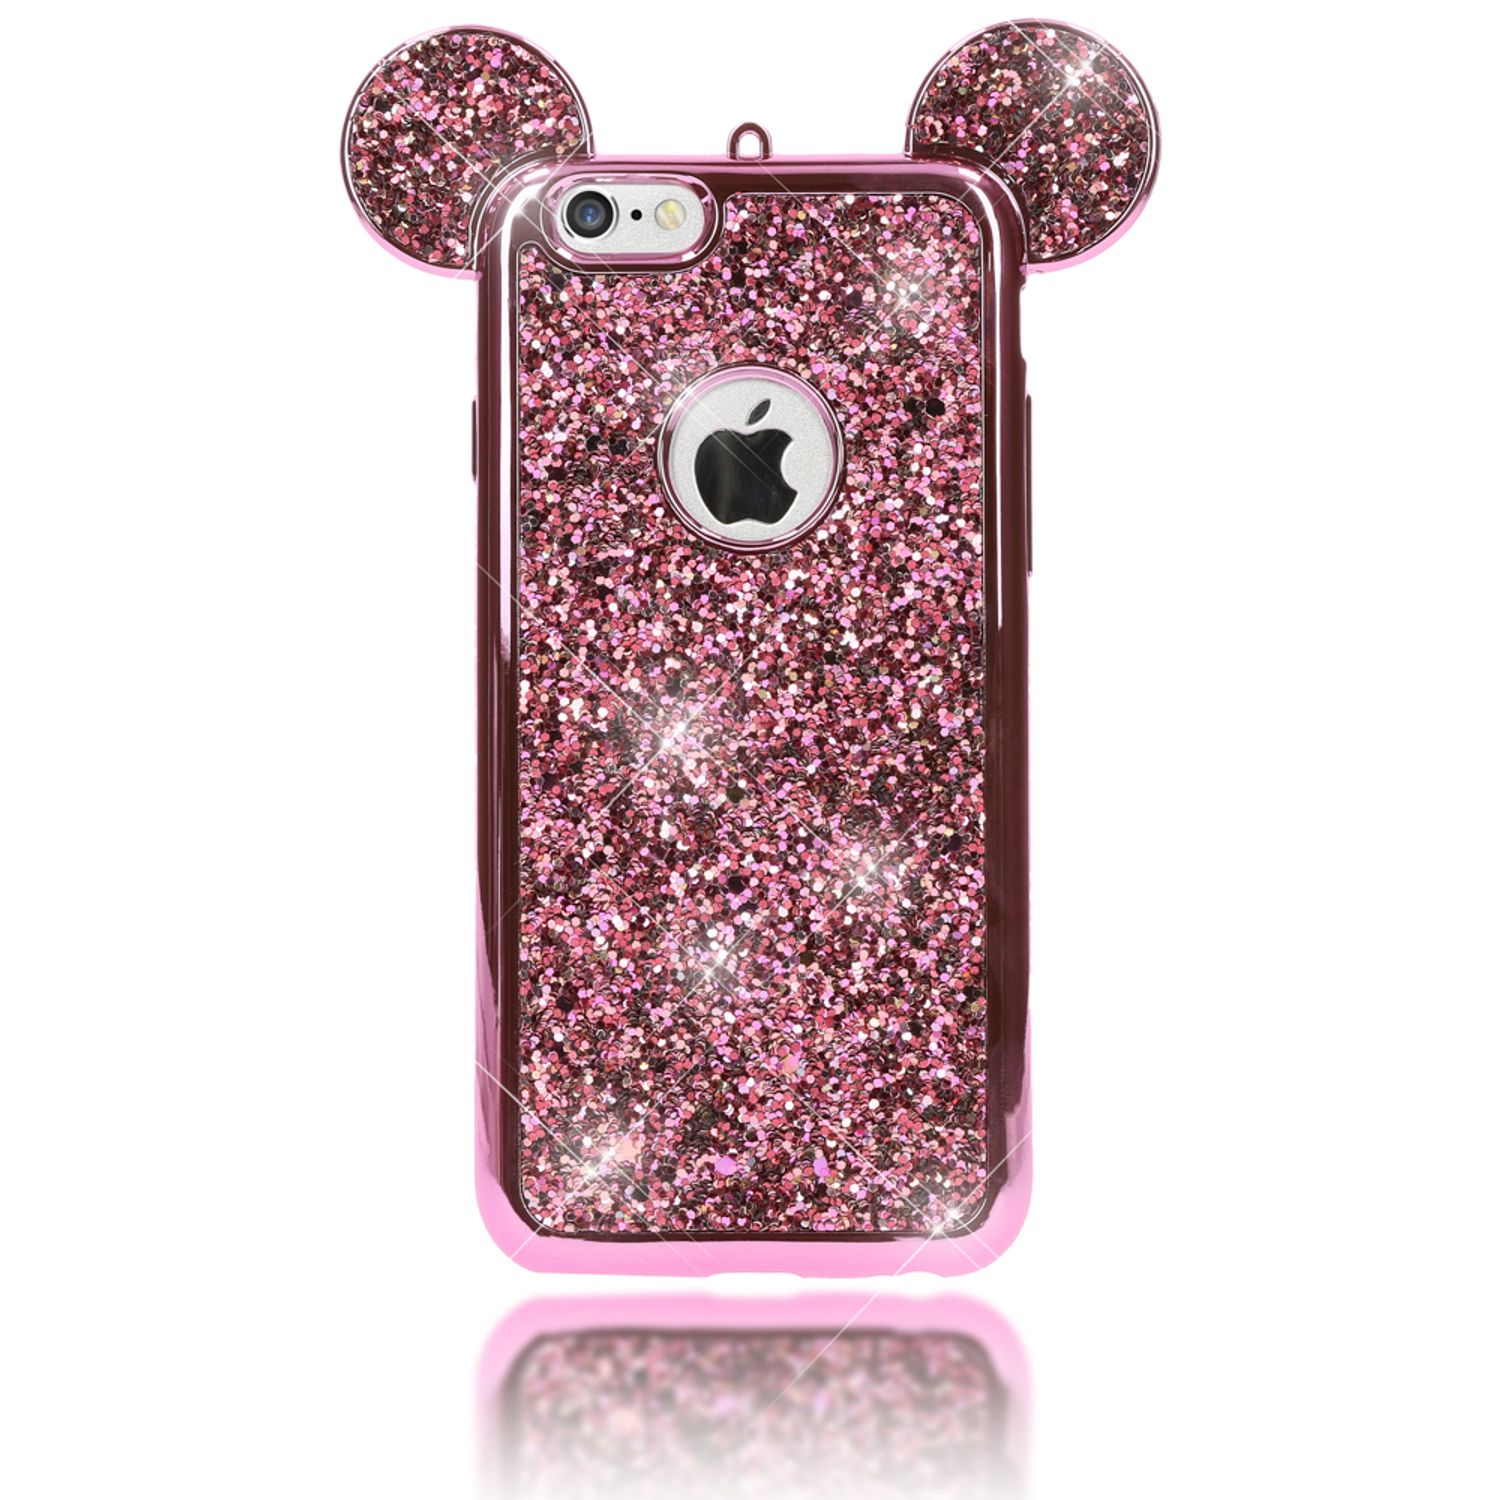 Hülle, iPhone NALIA 6s, Glitzer Silikon Mouse-Look 6 Apple, iPhone Backcover, Pink